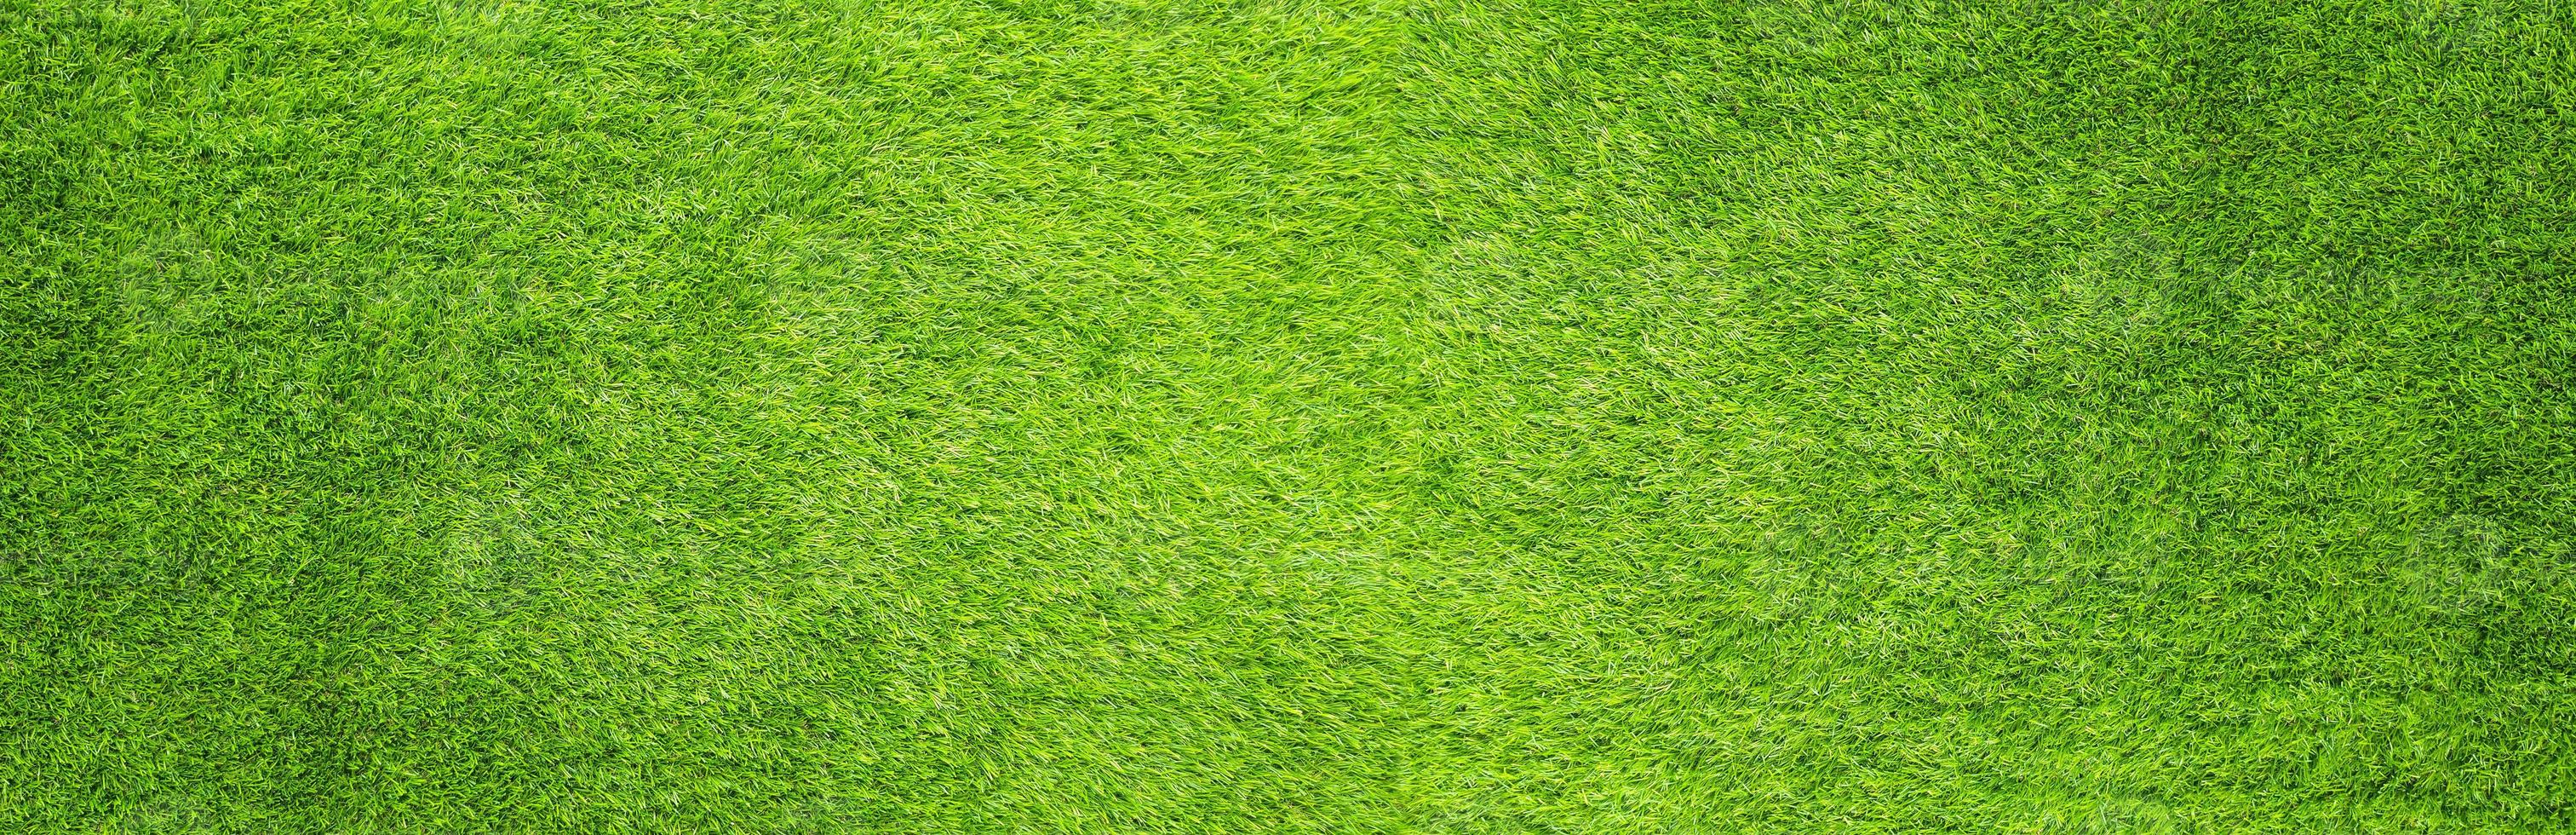 The artificial green grass pattern texture background photo